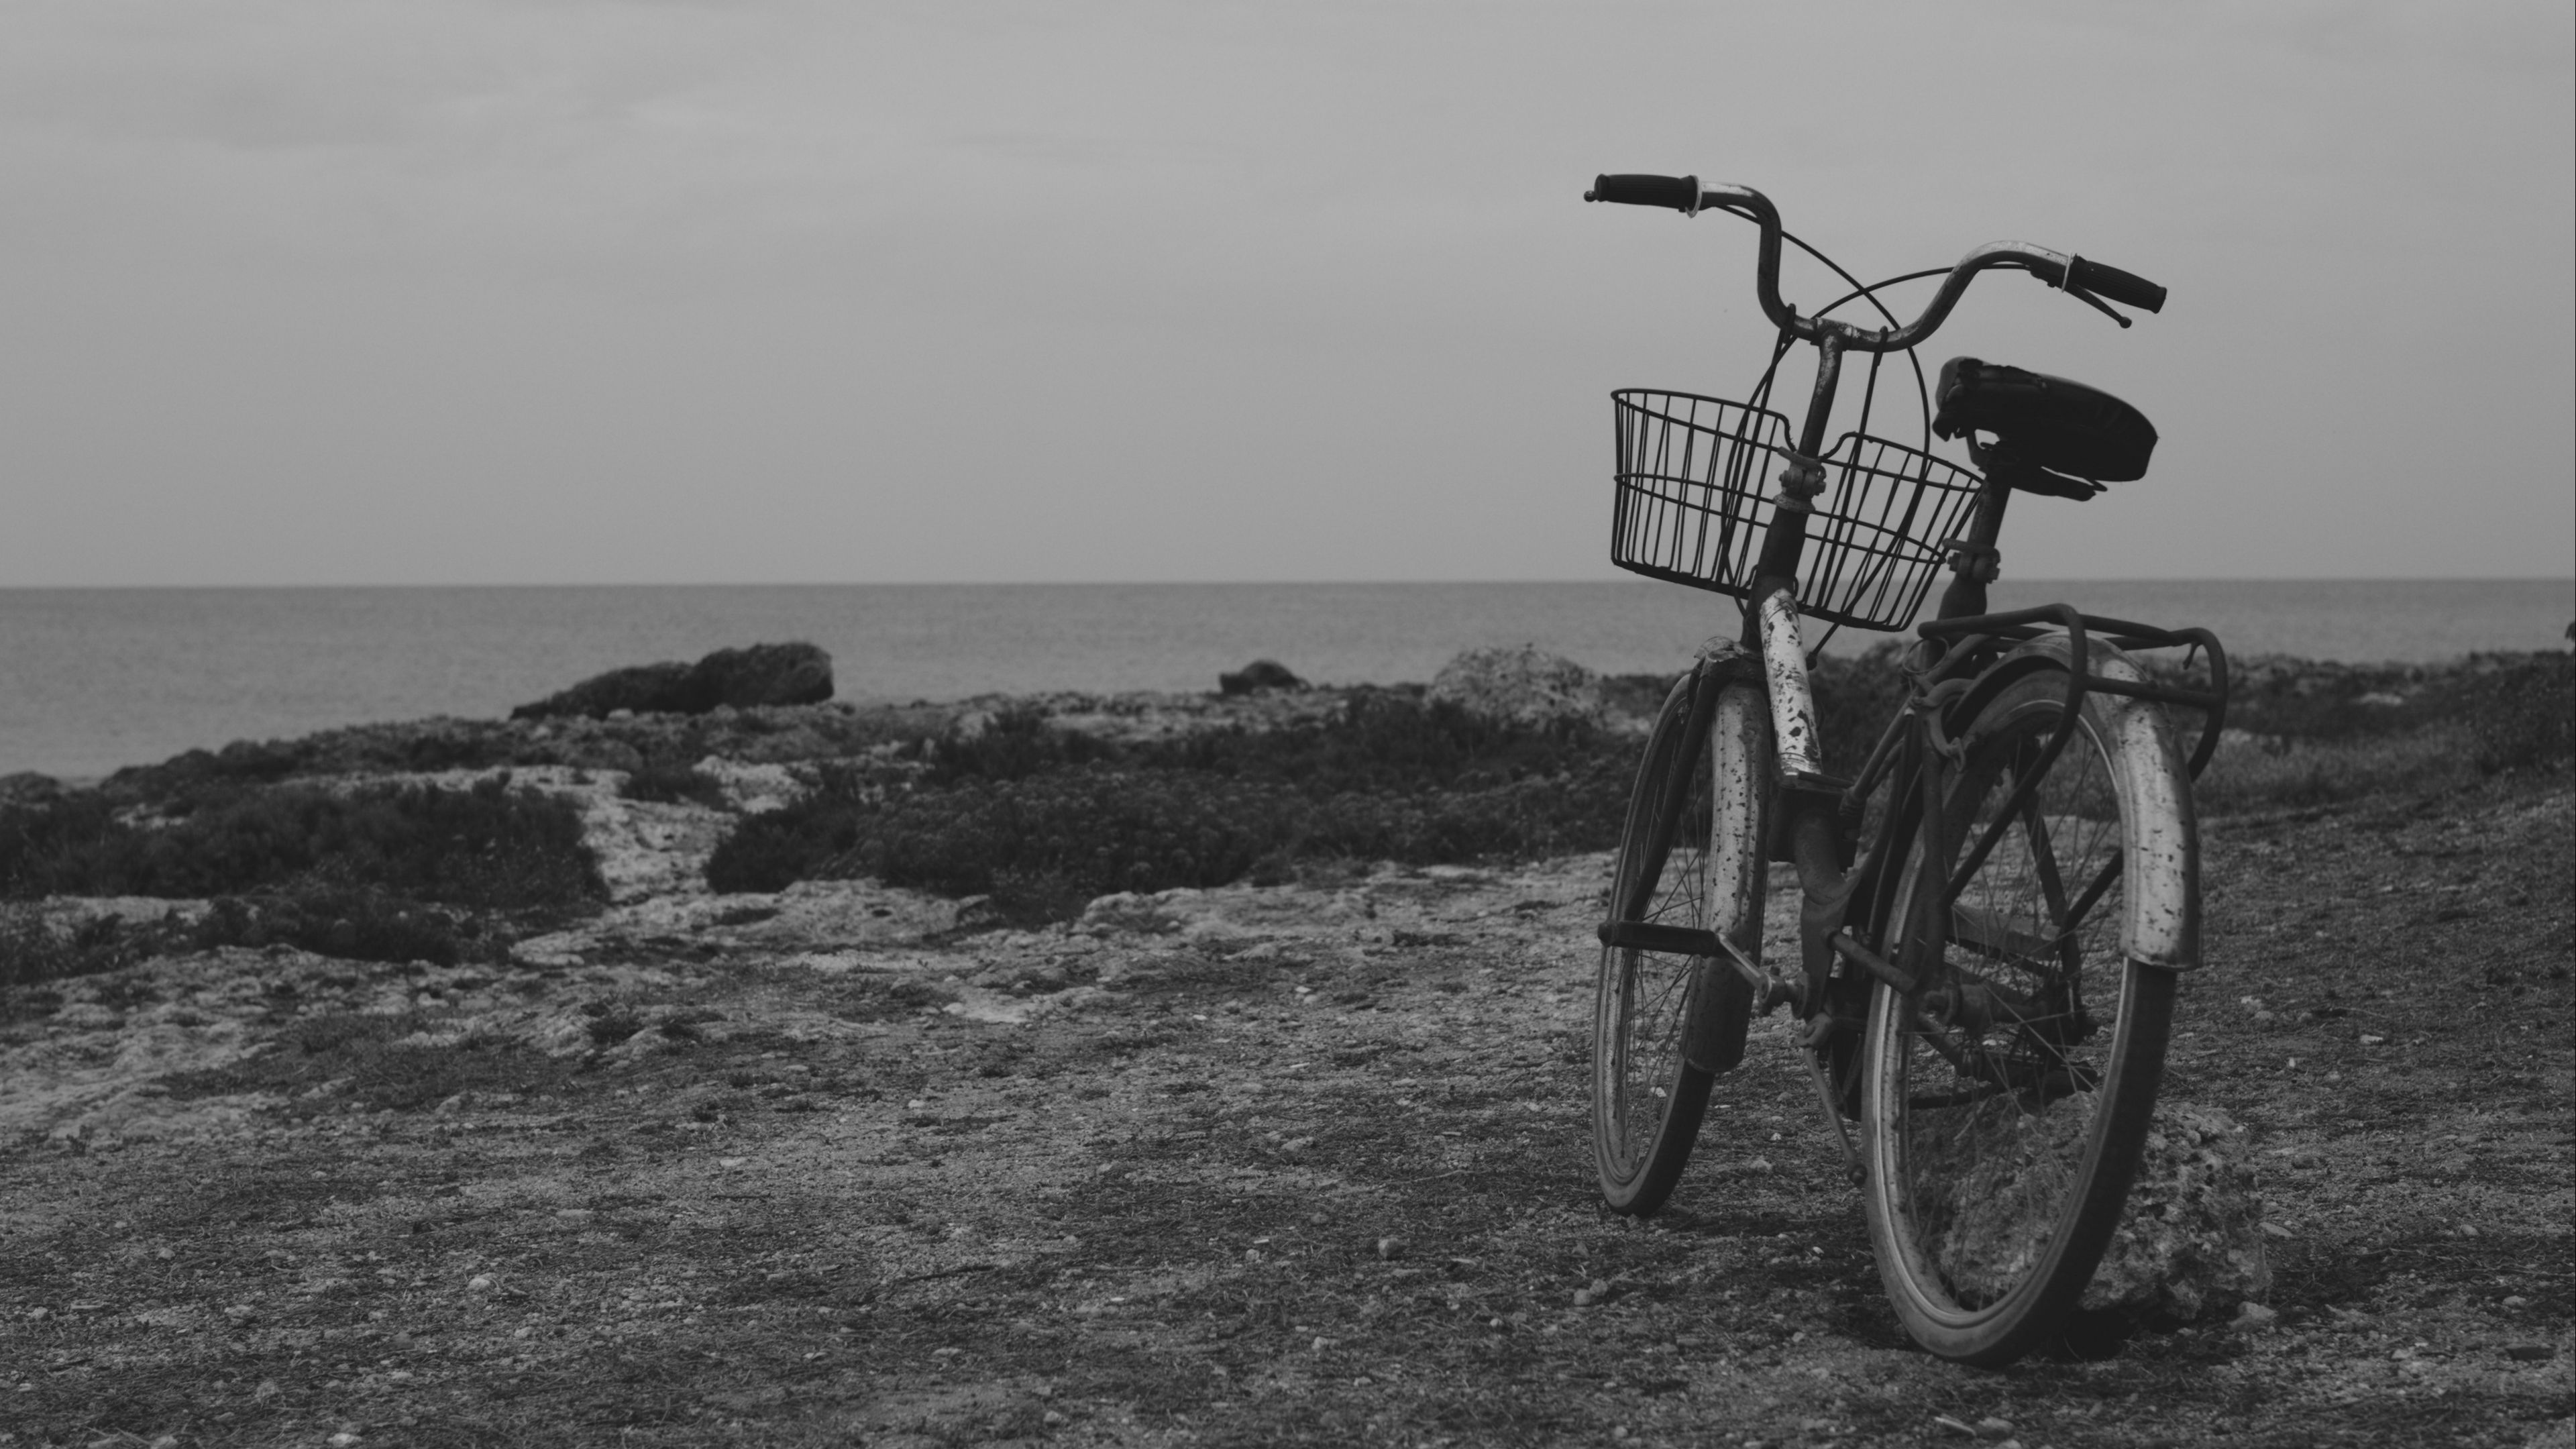 Download Wallpaper 3840x2160 Bicycle Bw Old 4k Uhd 169 Hd Background